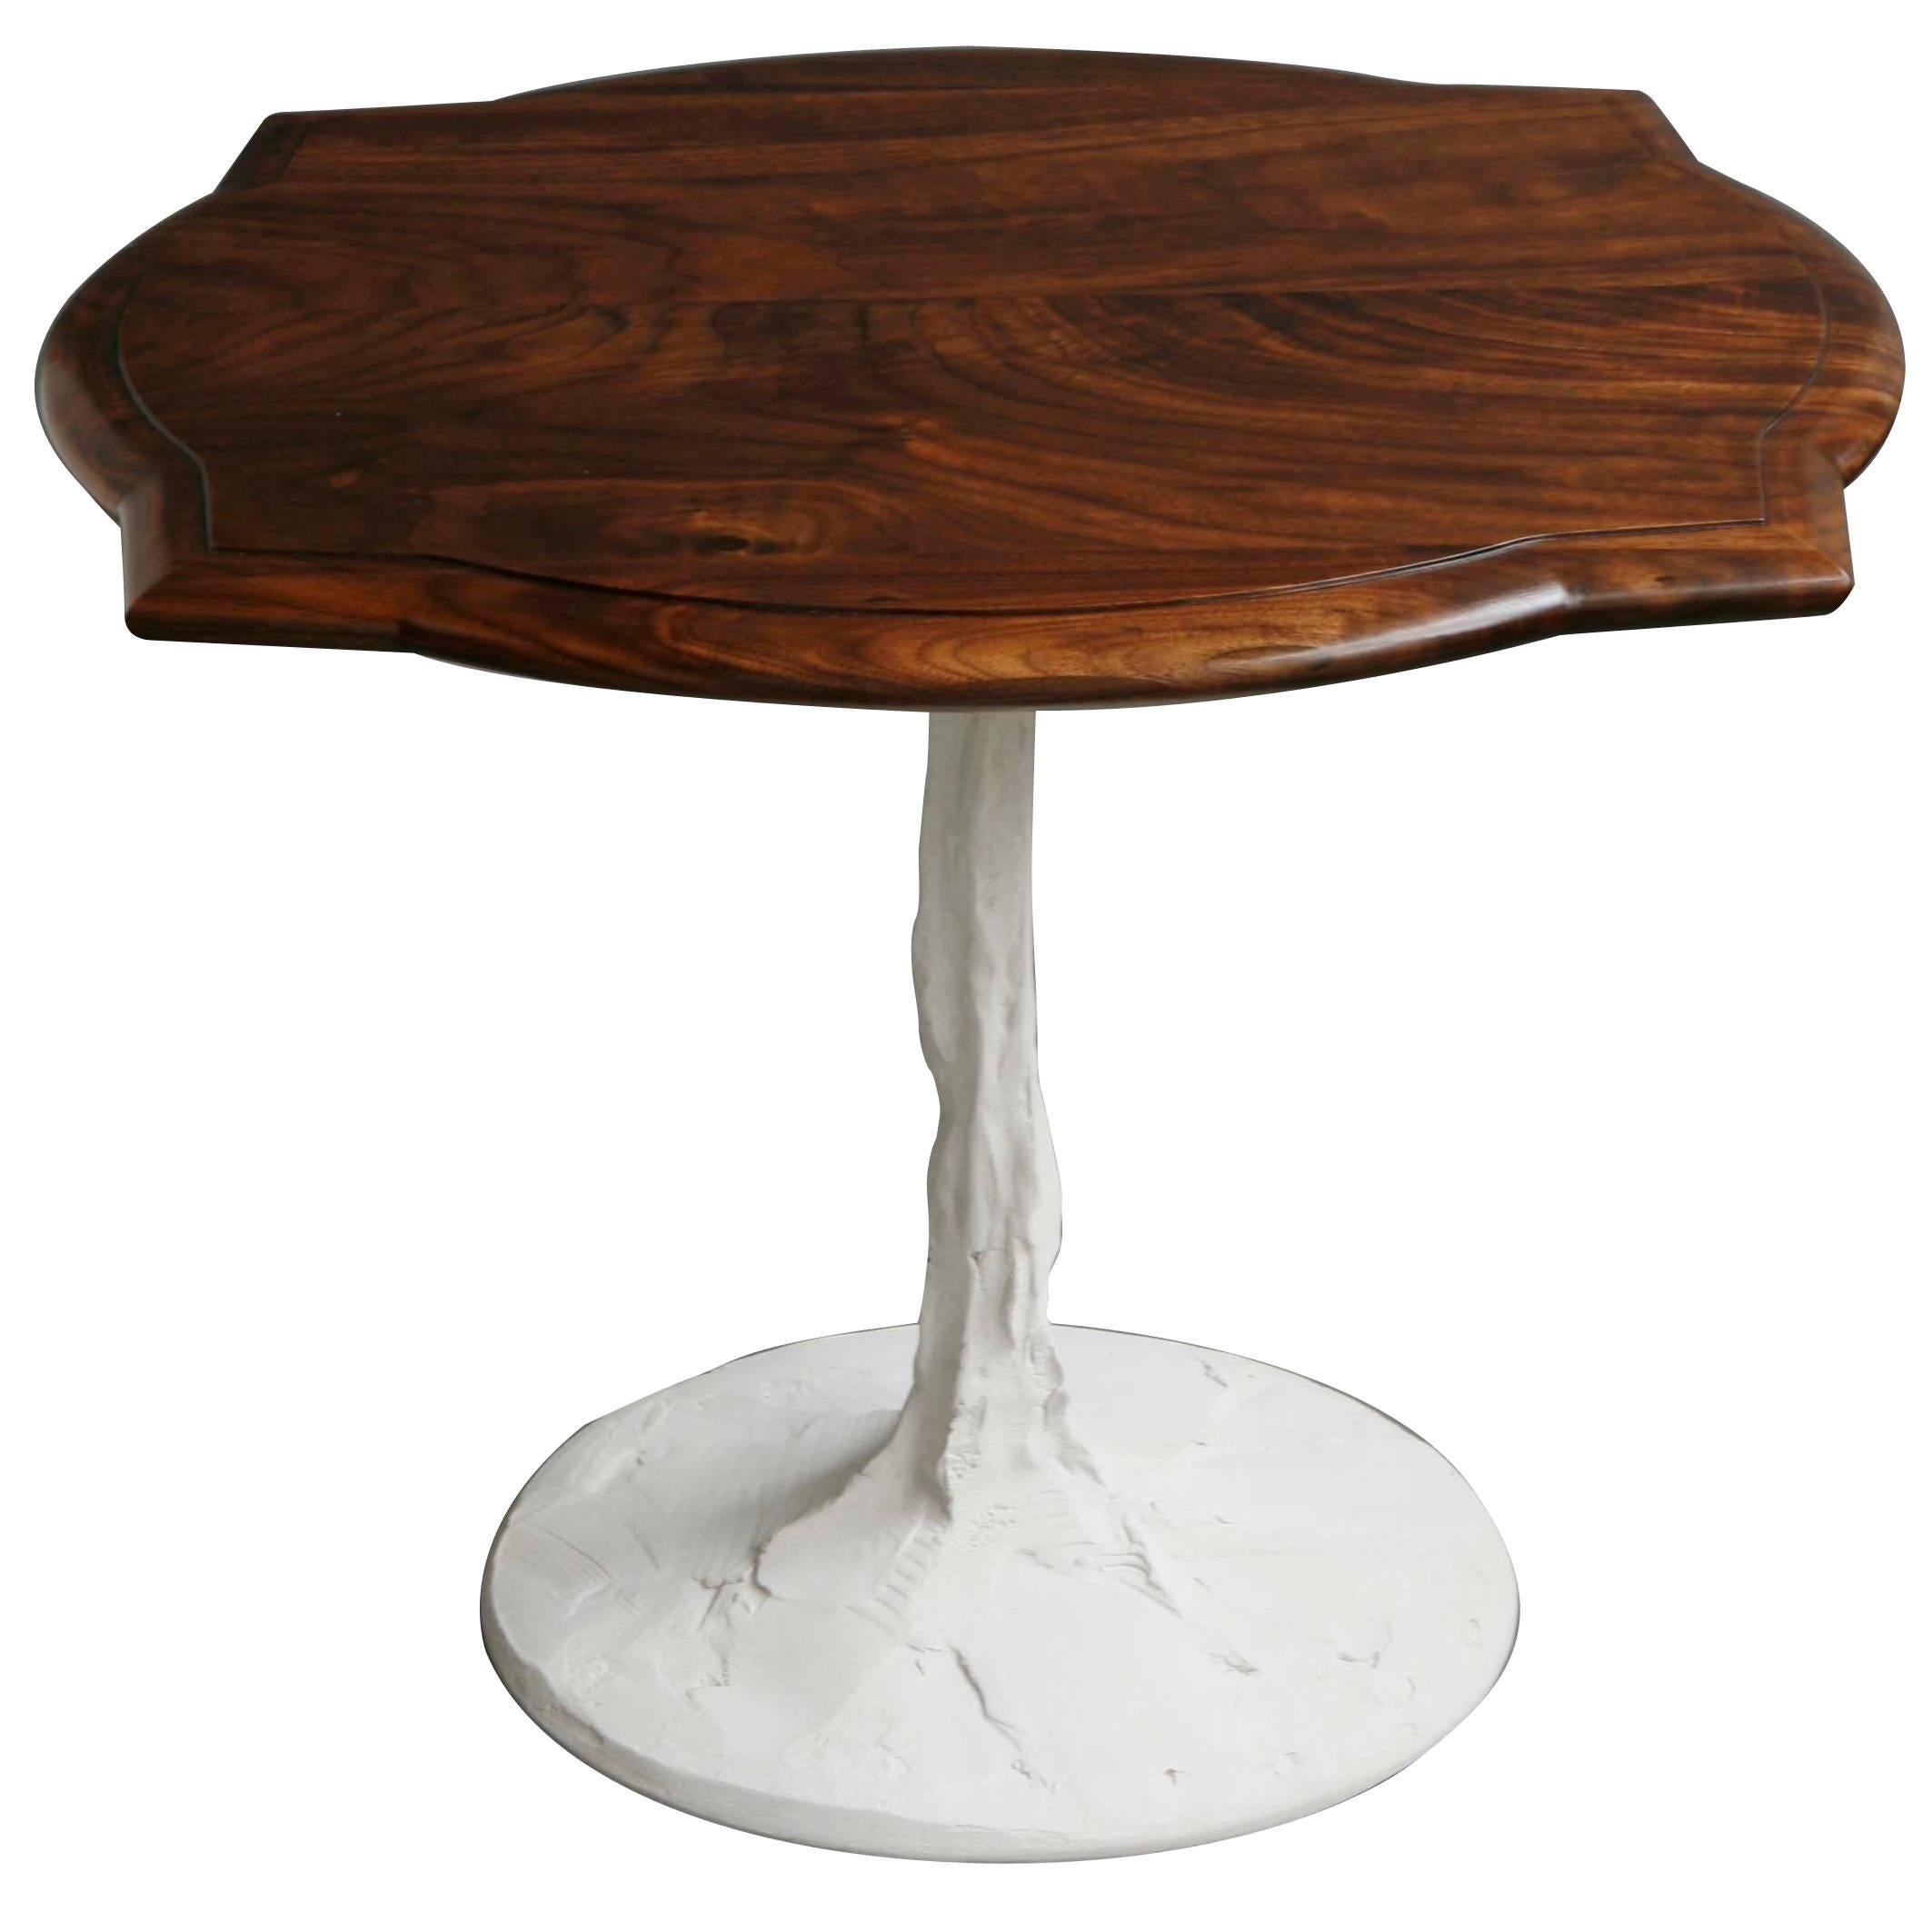 Caption Side Table in Figured Walnut with Concrete Pedestal Base - IN STOCK For Sale